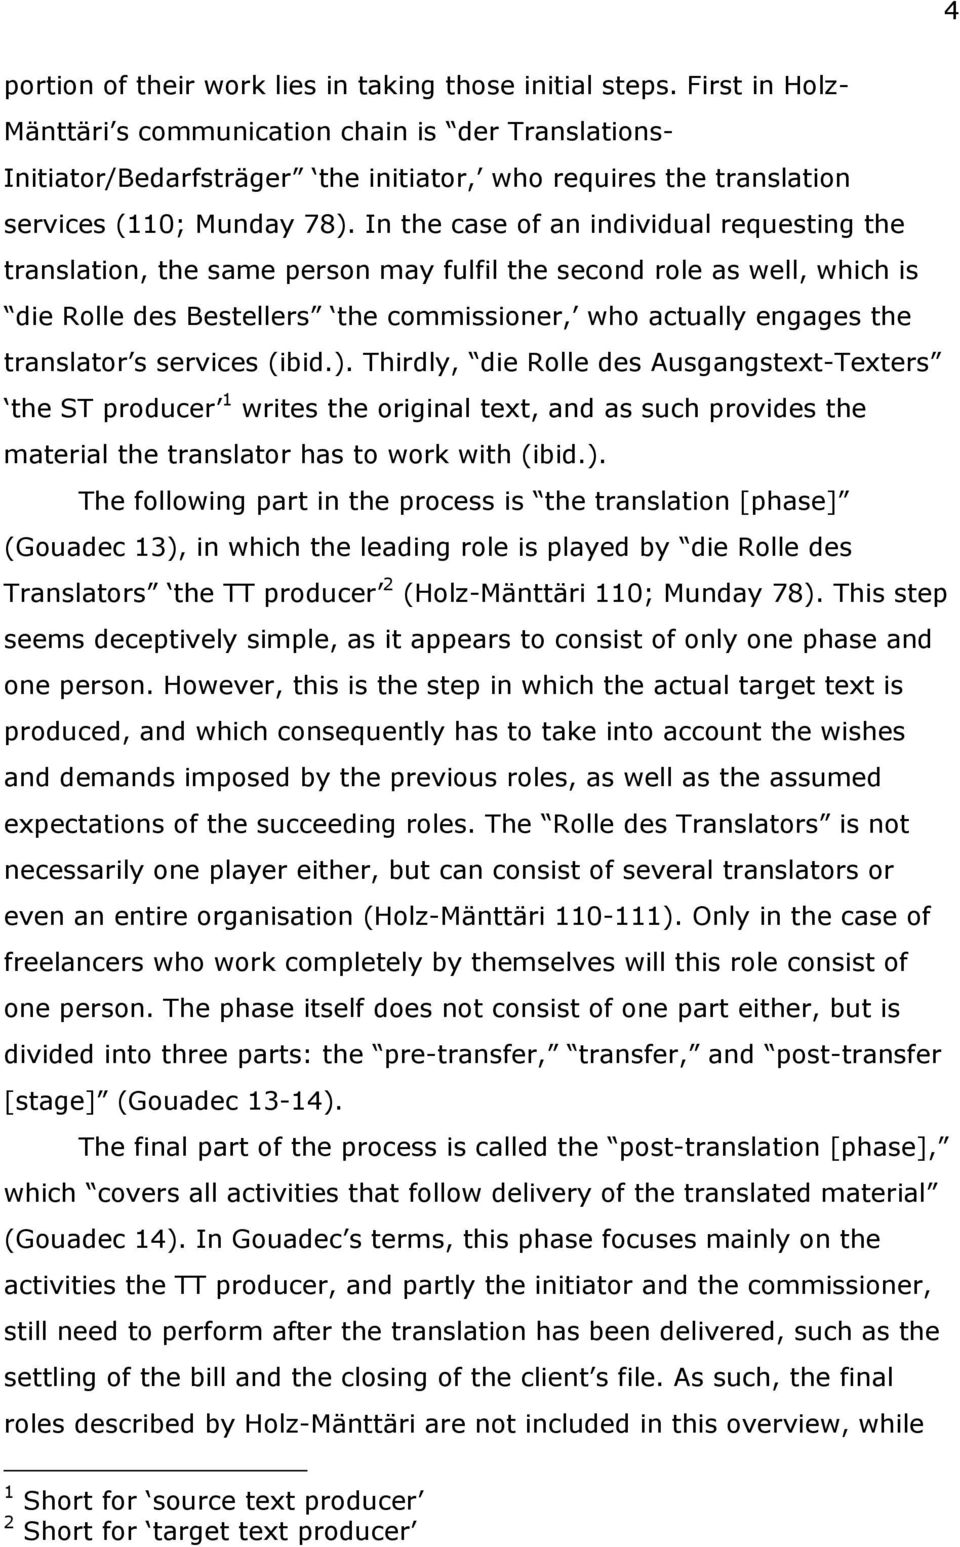 In the case of an individual requesting the translation, the same person may fulfil the second role as well, which is die Rolle des Bestellers the commissioner, who actually engages the translator s